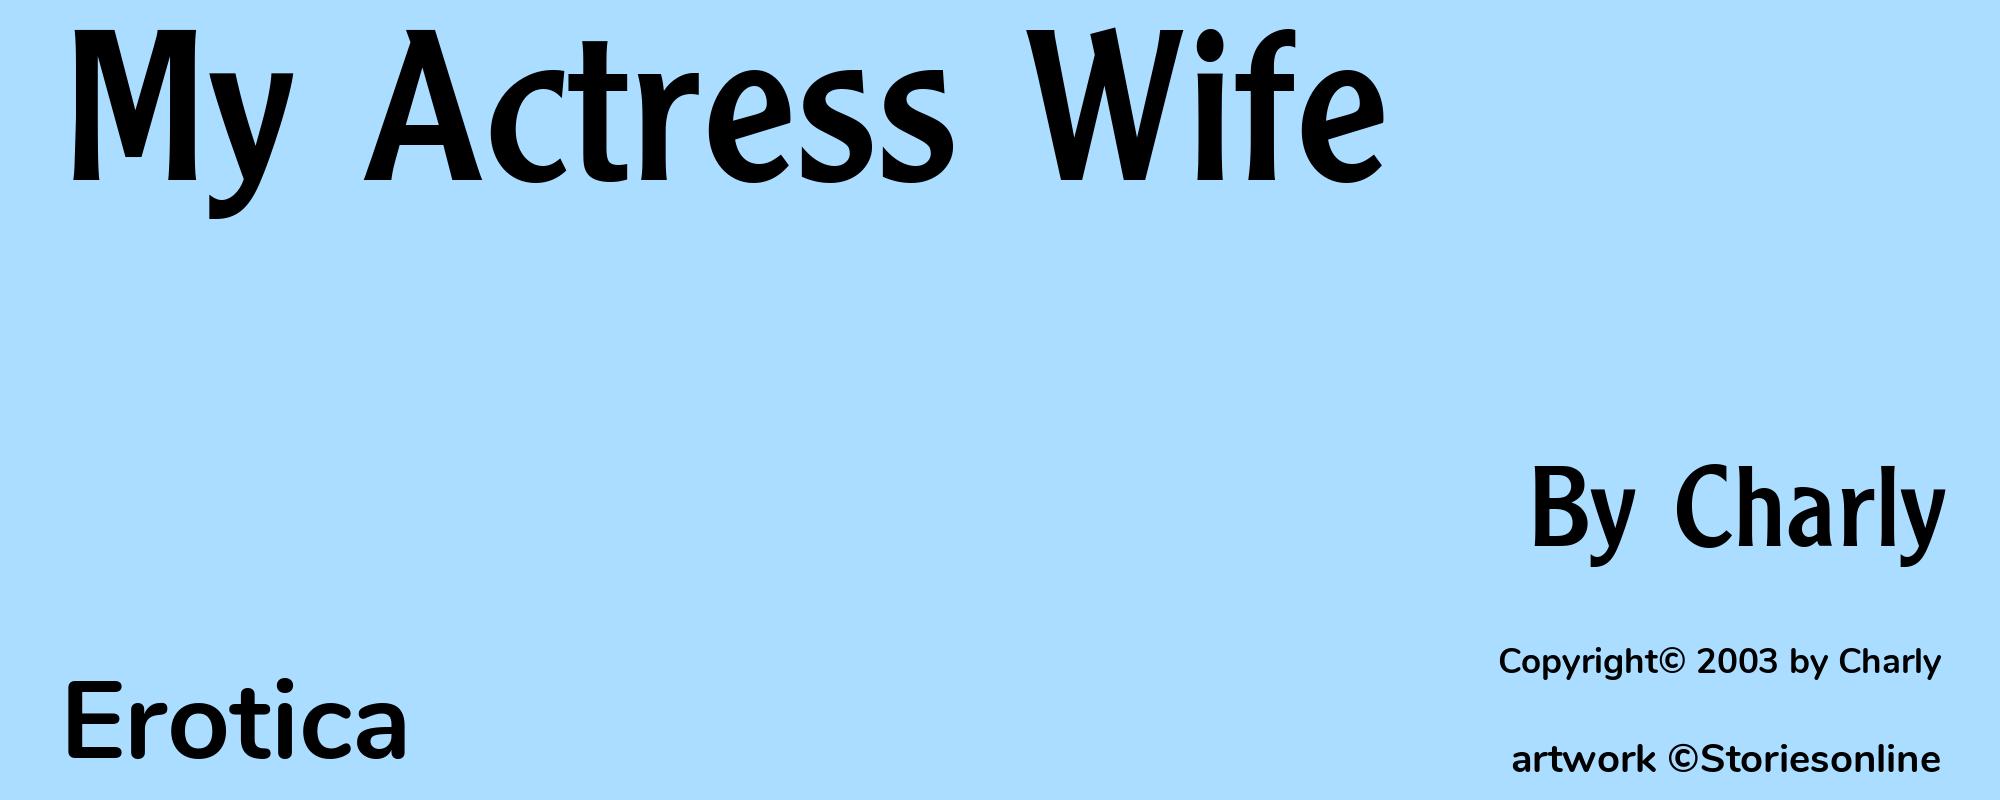 My Actress Wife - Cover